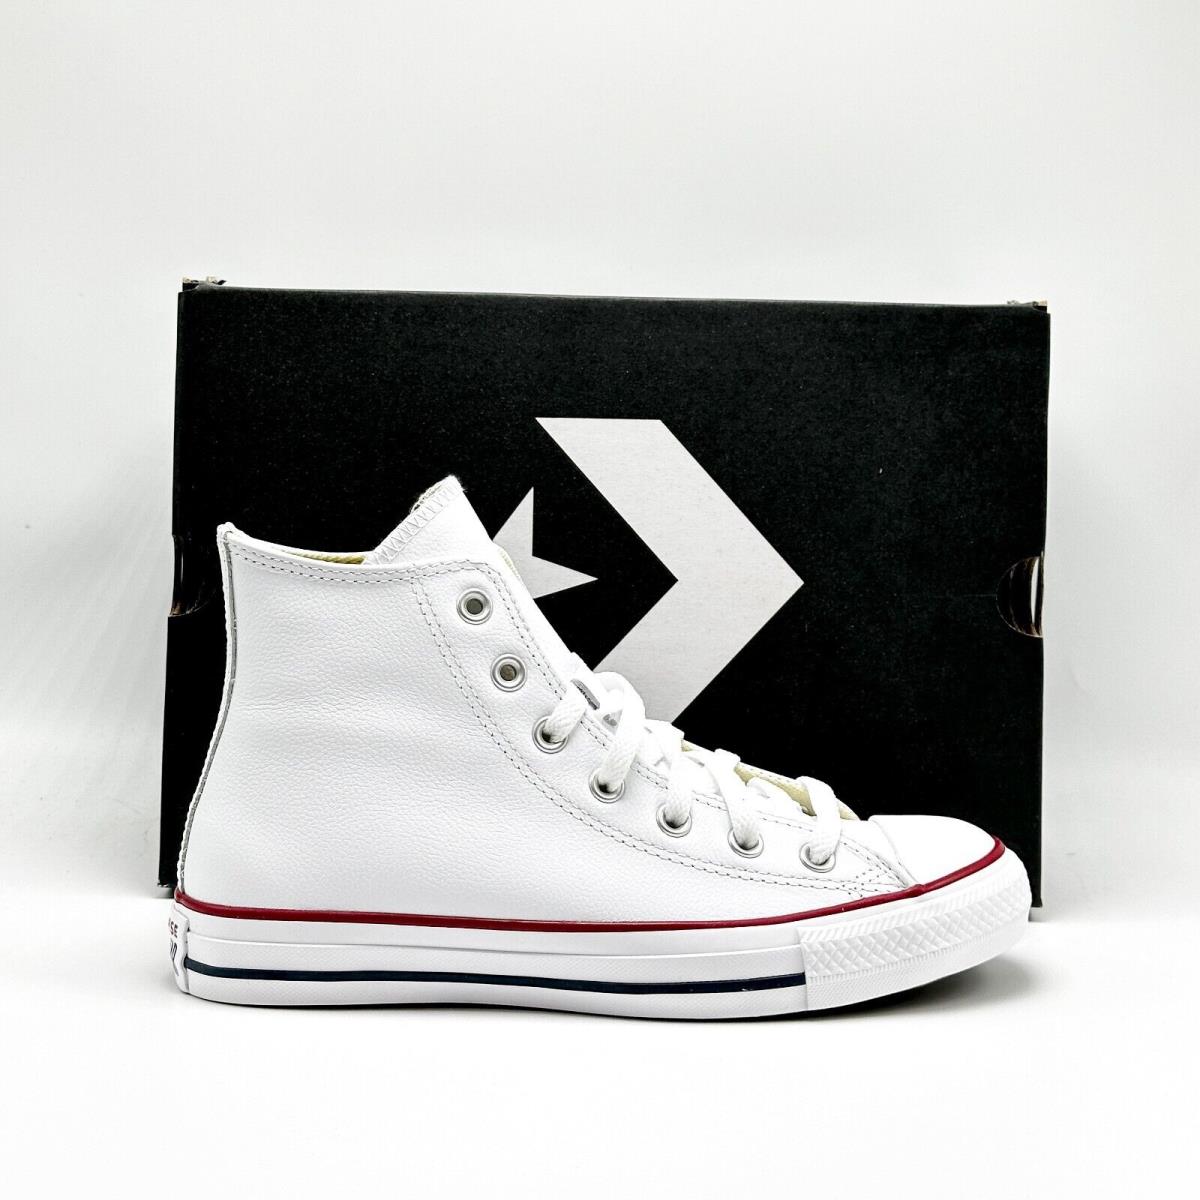 Unisex Converse Chuck Taylor All Star Leather High Top White 132169C